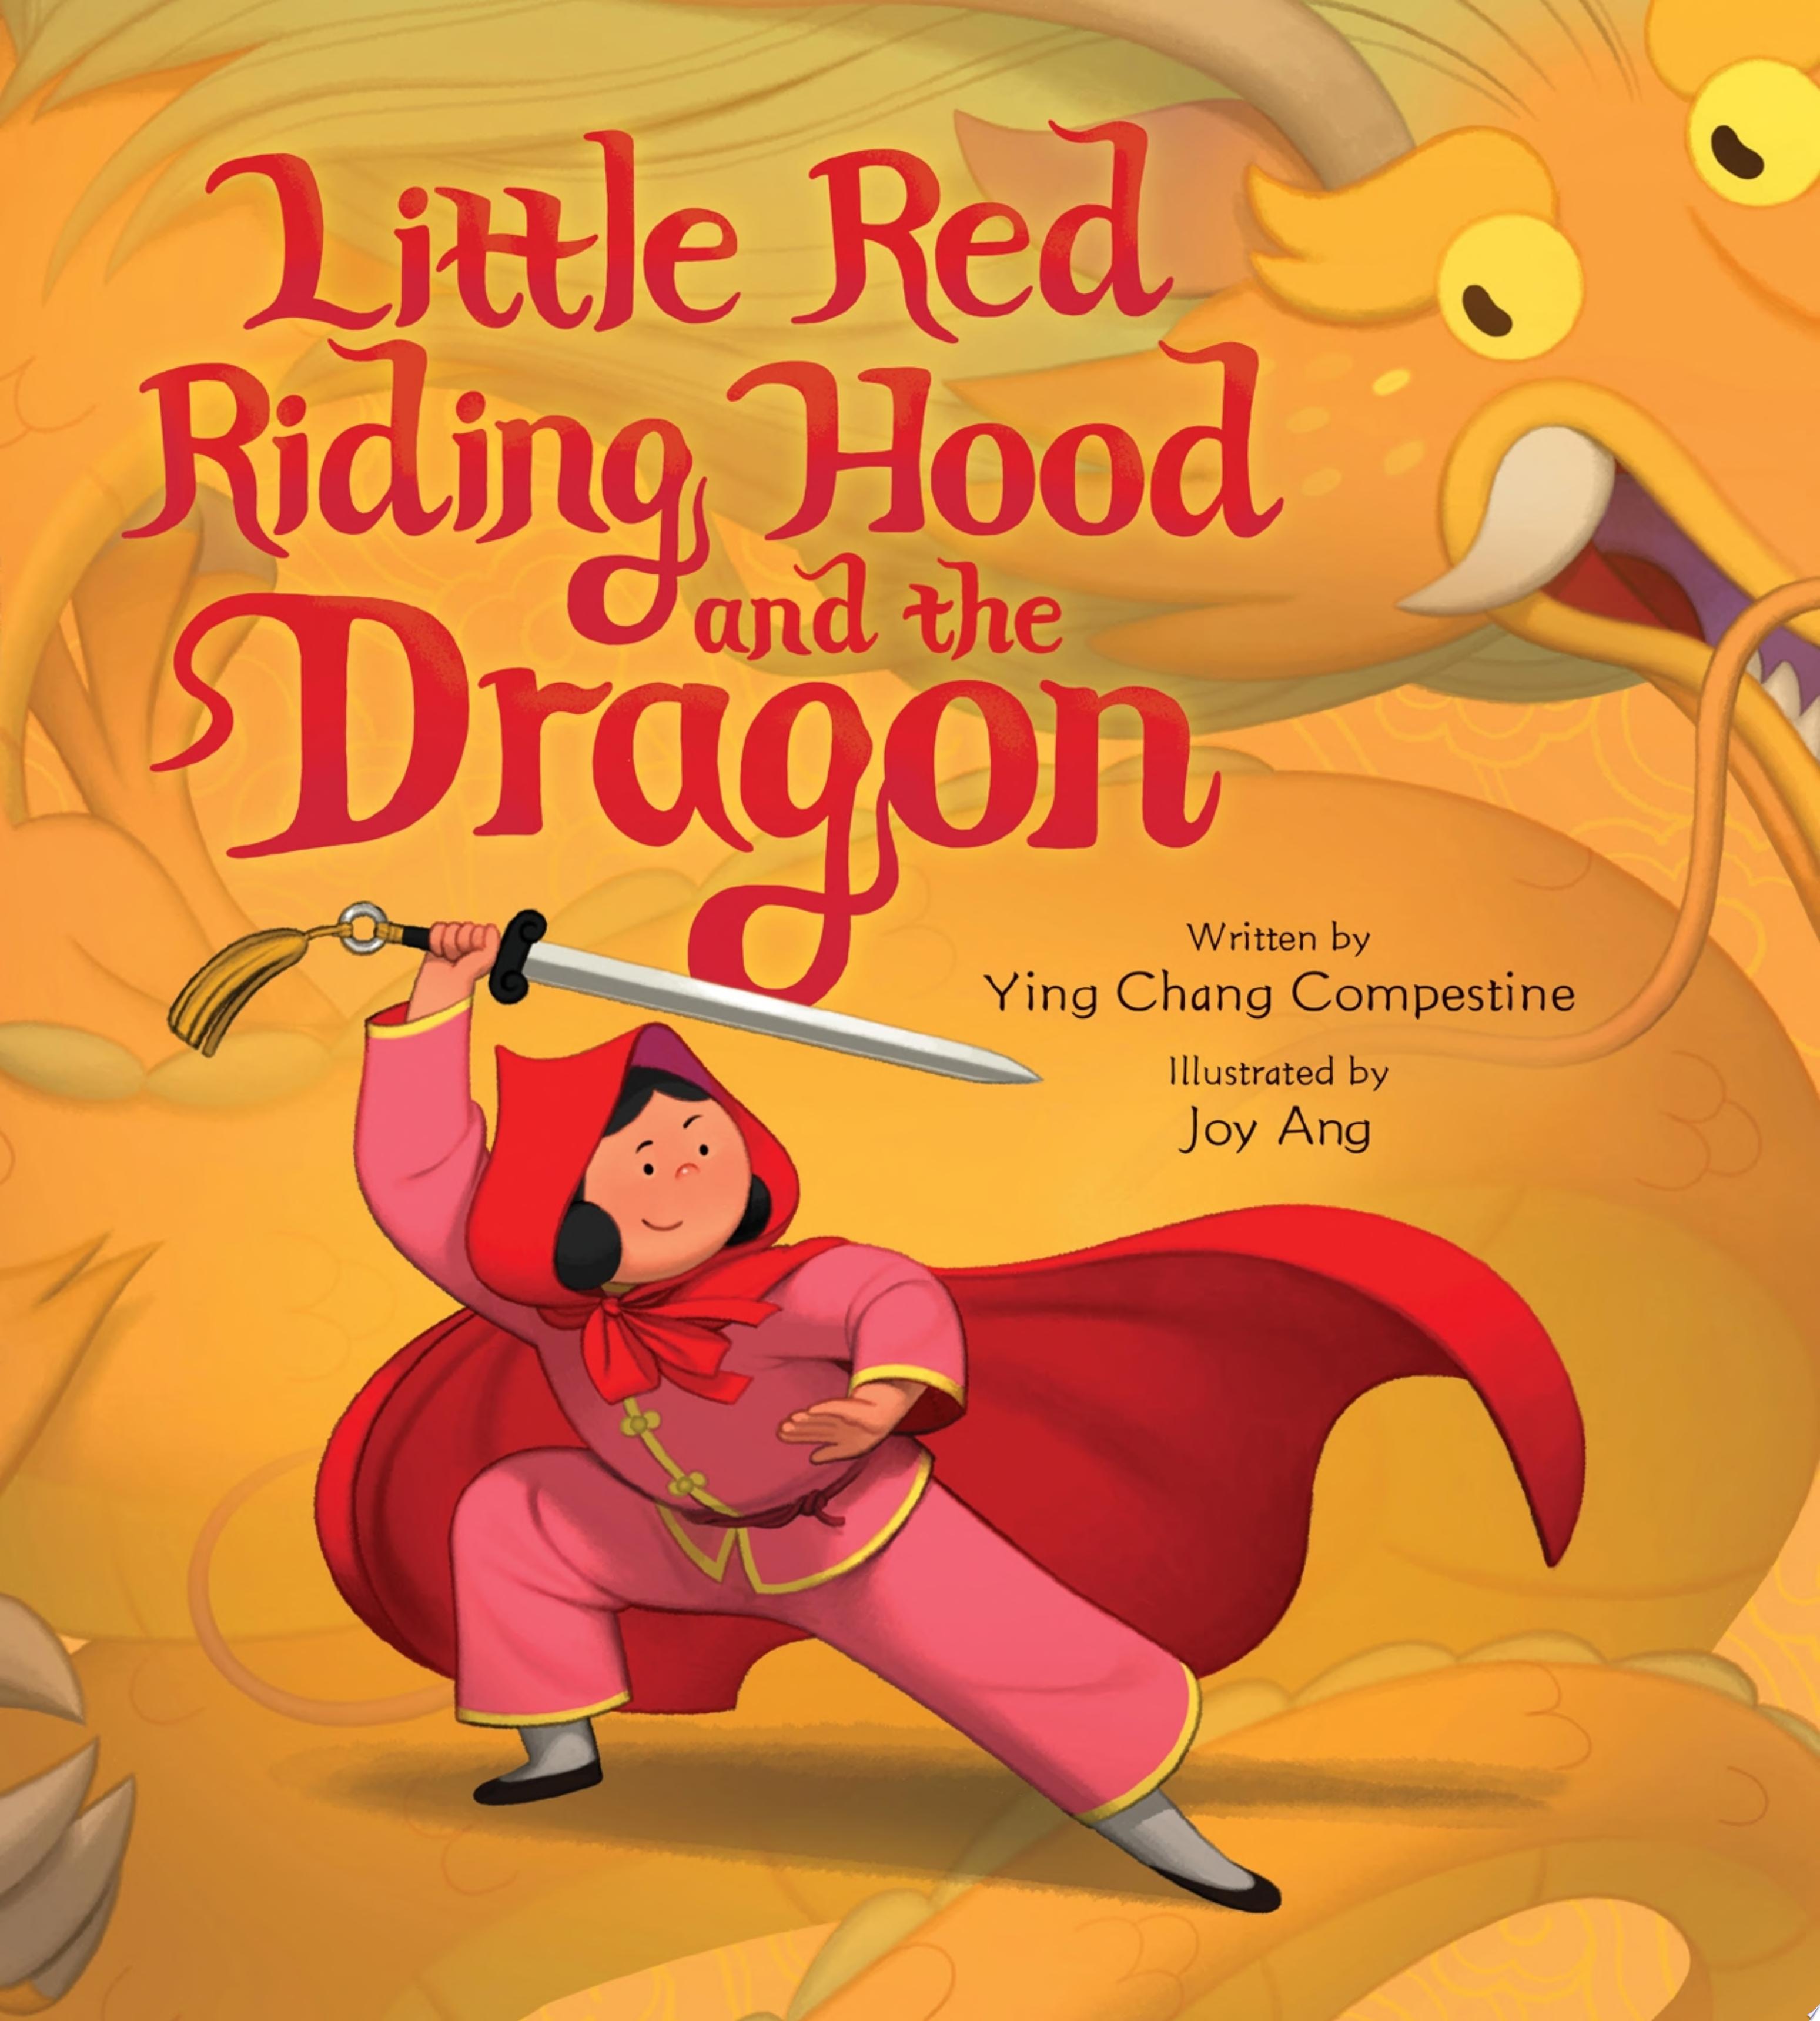 Image for "Little Red Riding Hood and the Dragon"